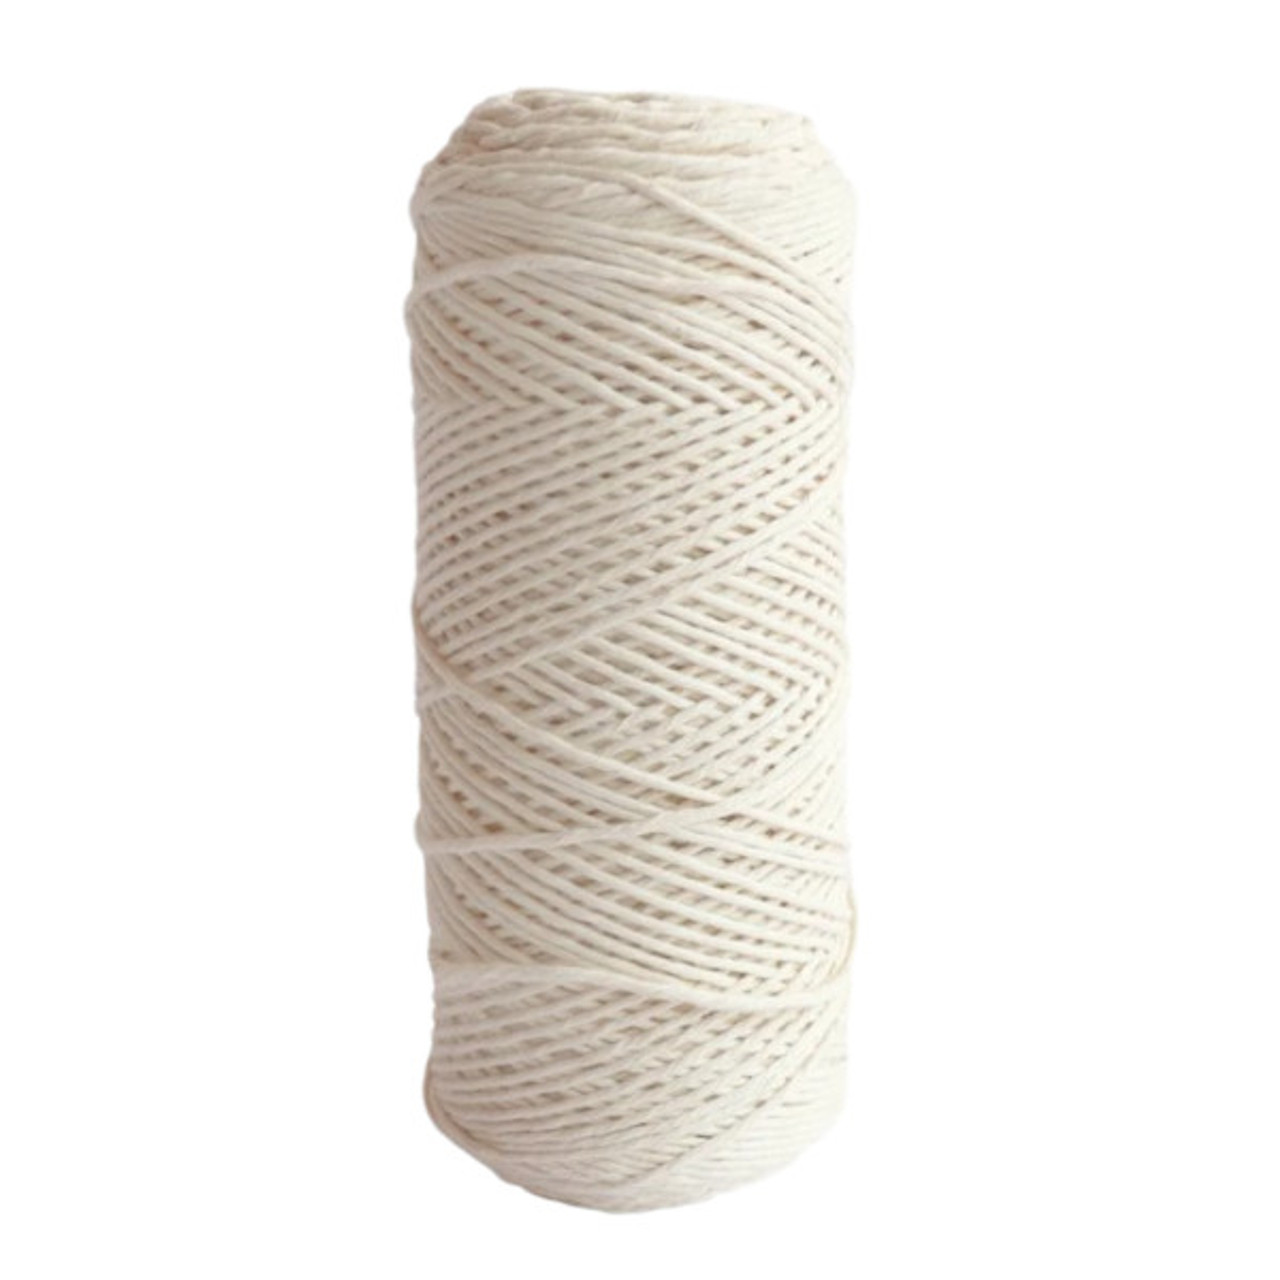 Modern Macrame Cotton Cord Spool 2mm Natural - The Websters